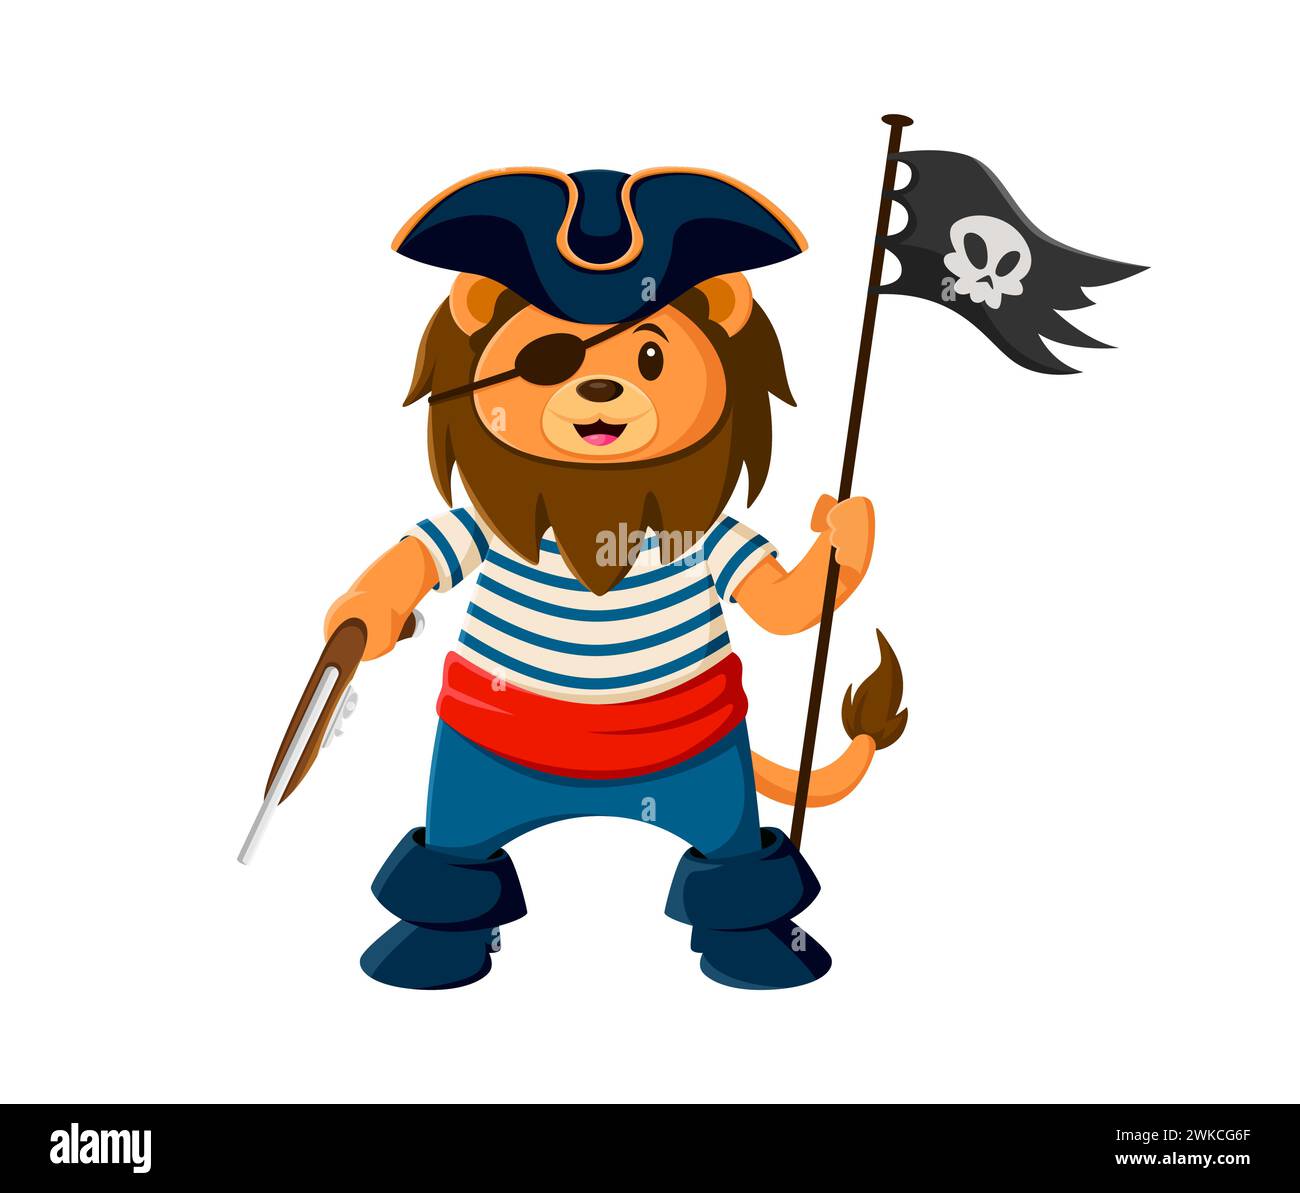 Cartoon lion pirate animal character. Isolated vector cute, playful kids personage holding black flag with a skull, and gun, blending ferocity with whimsy in a swashbuckling adventure on the high seas Stock Vector